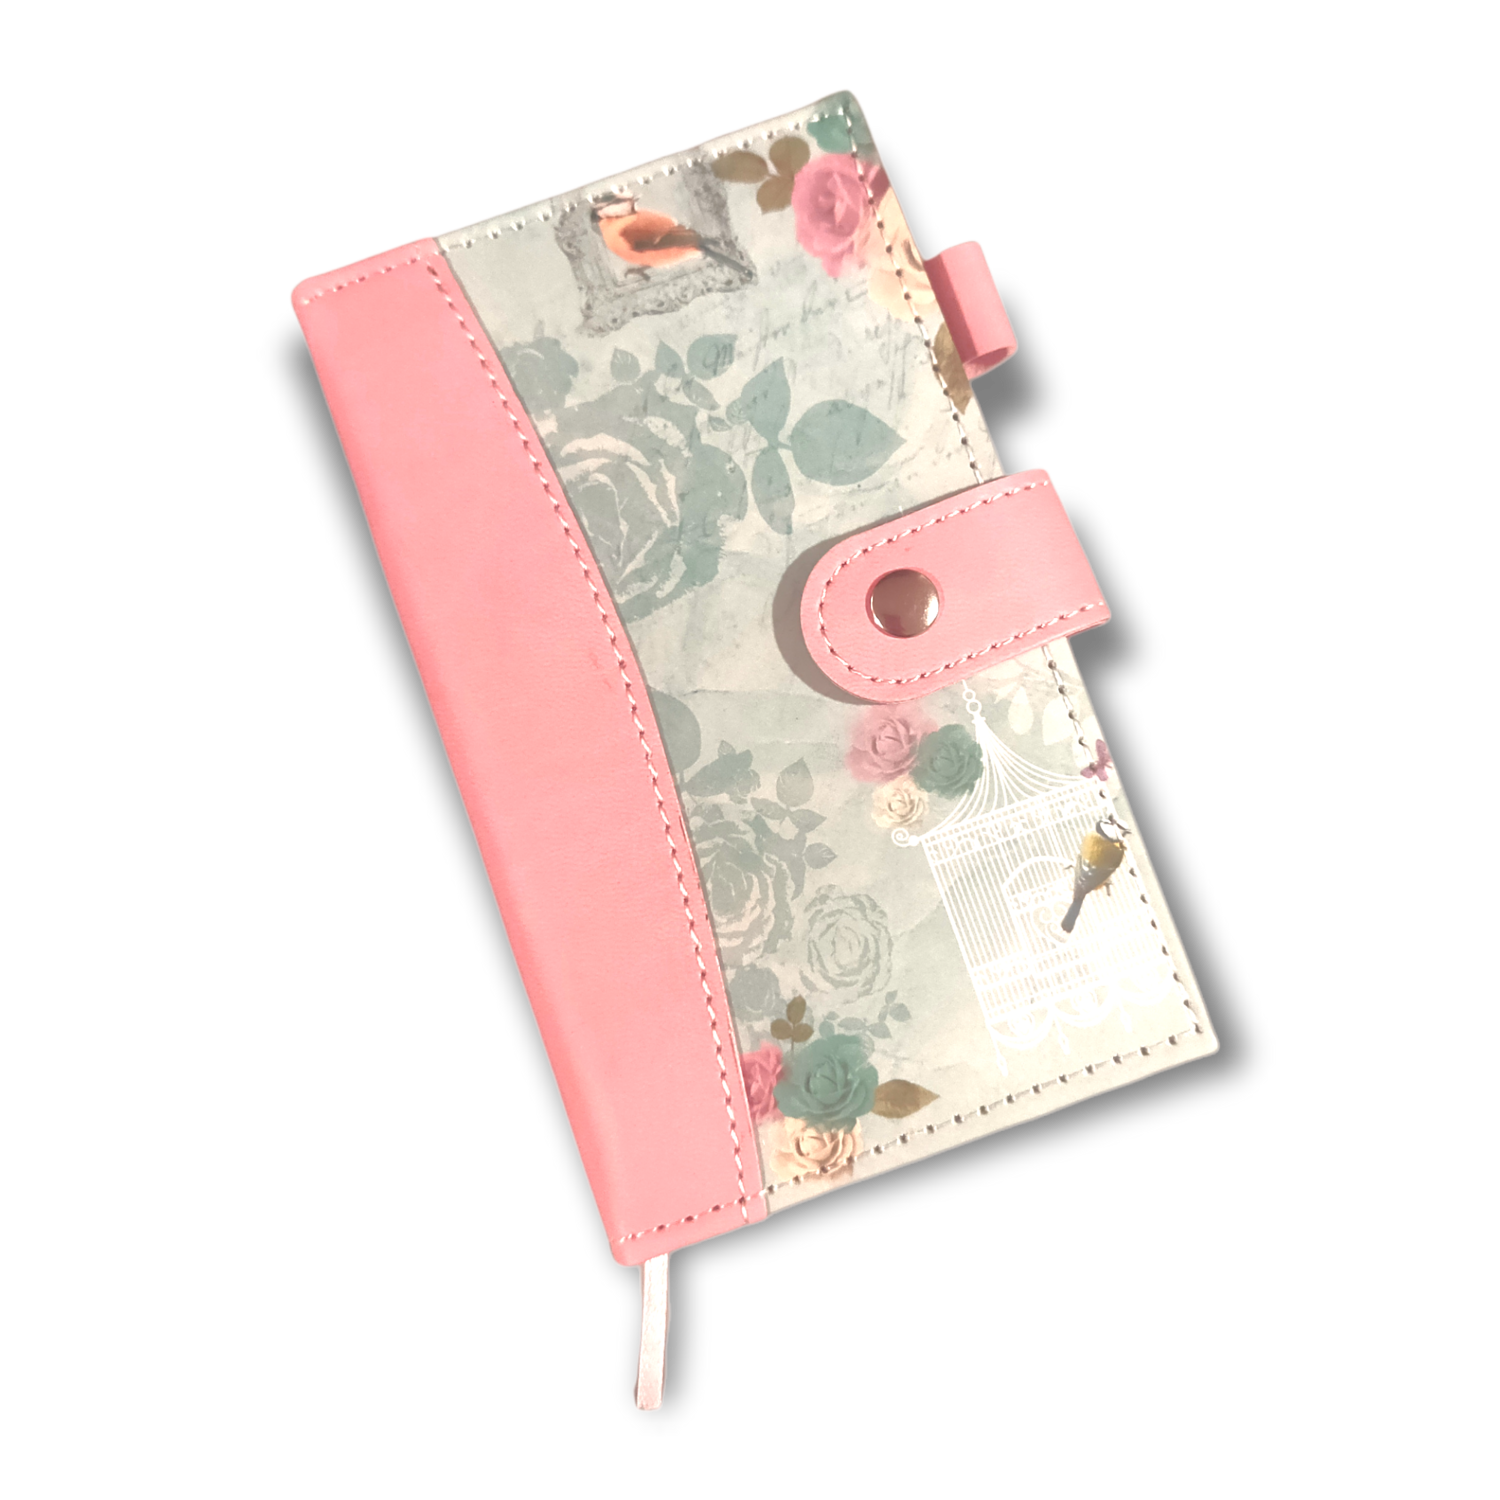 A6 Lined Notebook -  Birds & Roses, With Ribbon Bookmark & Button Closure.